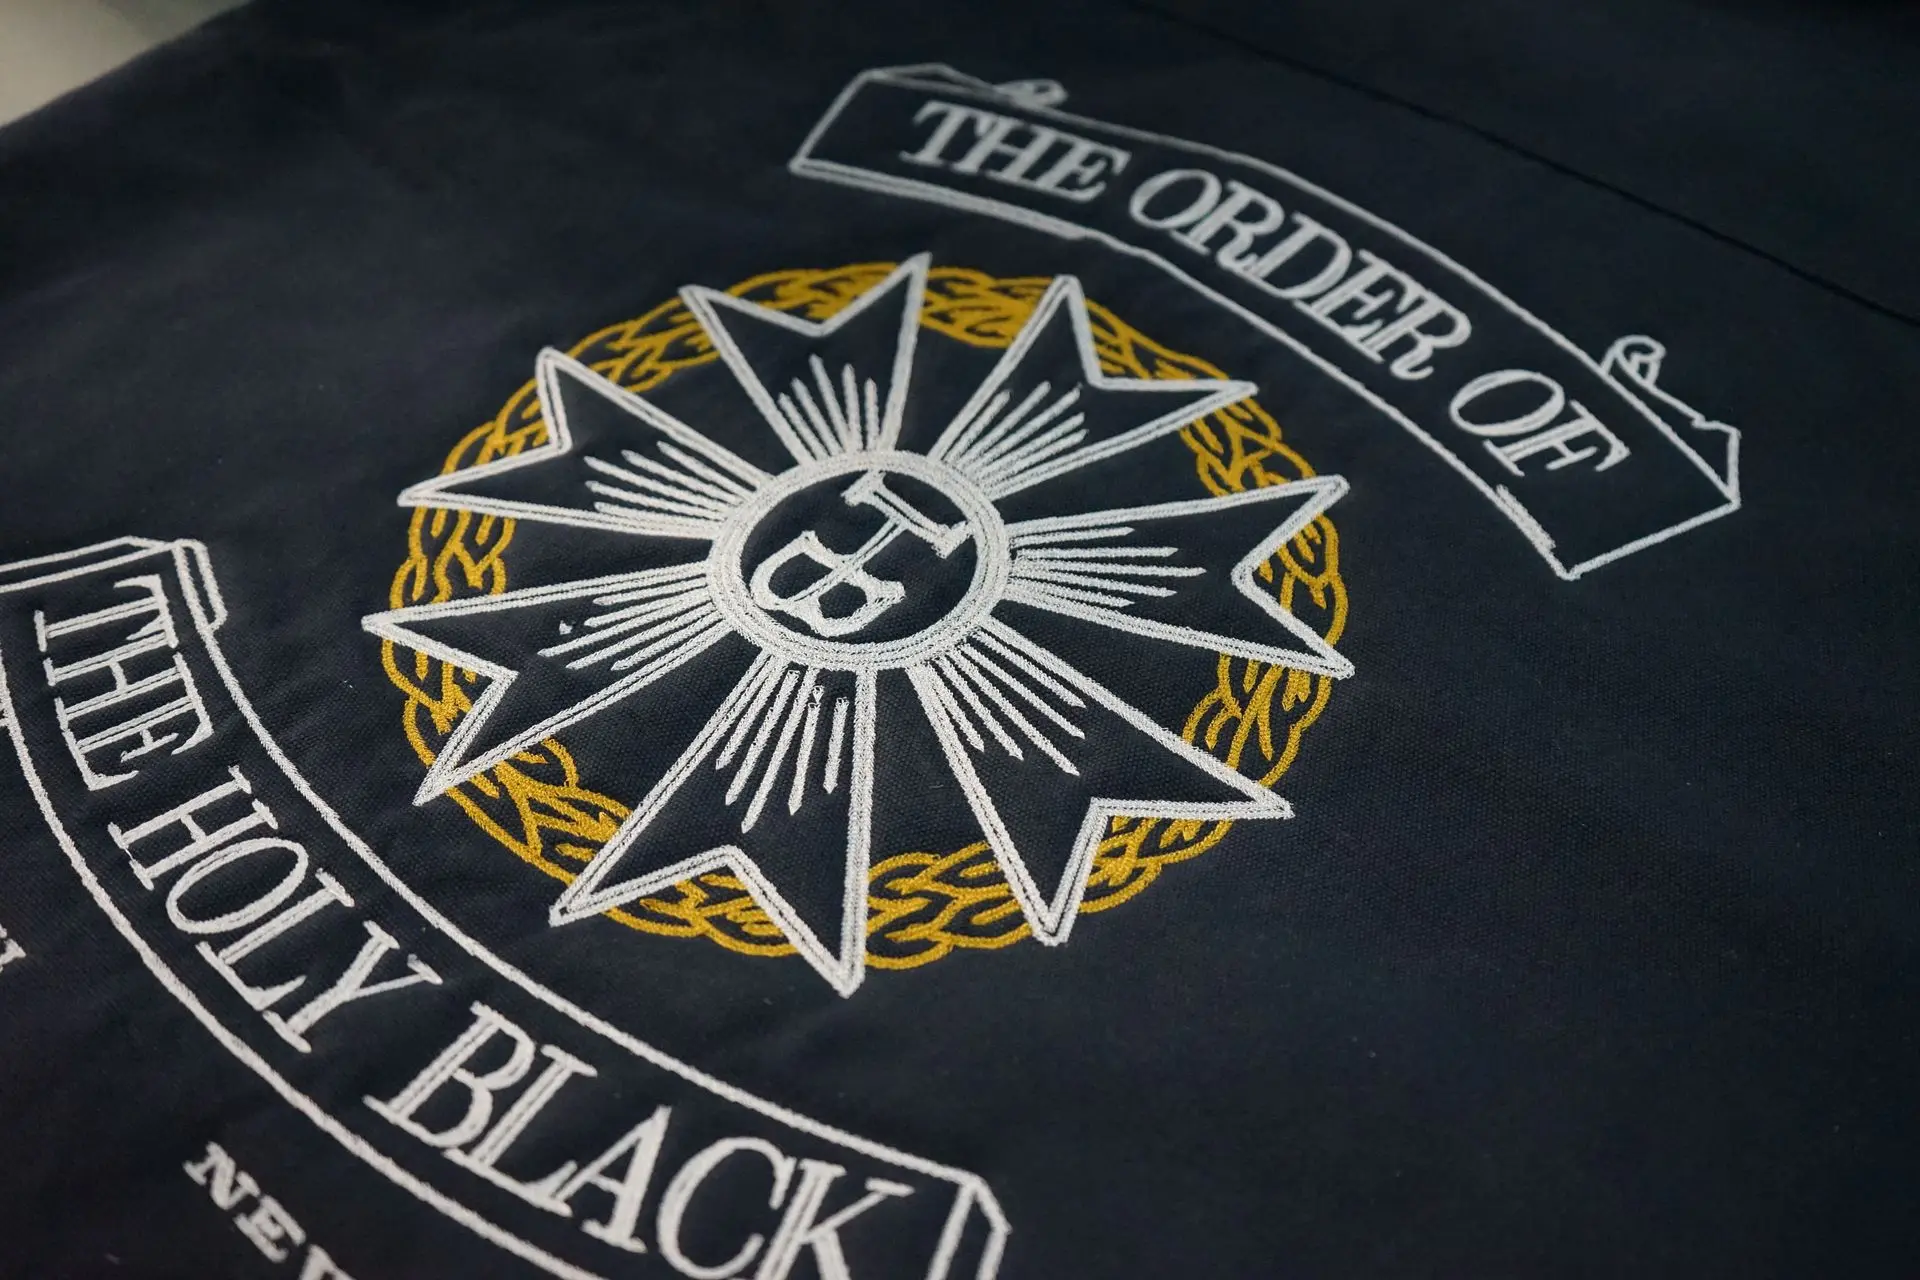 Intricate embroidery of 'The Order of The Holy Black' emblem on fabric showcases exquisite craftsmanship. The design features a radiant star with a barber's straight razor at its heart, encircled by golden laurel wreaths, symbolizing prestige and tradition in grooming excellence.